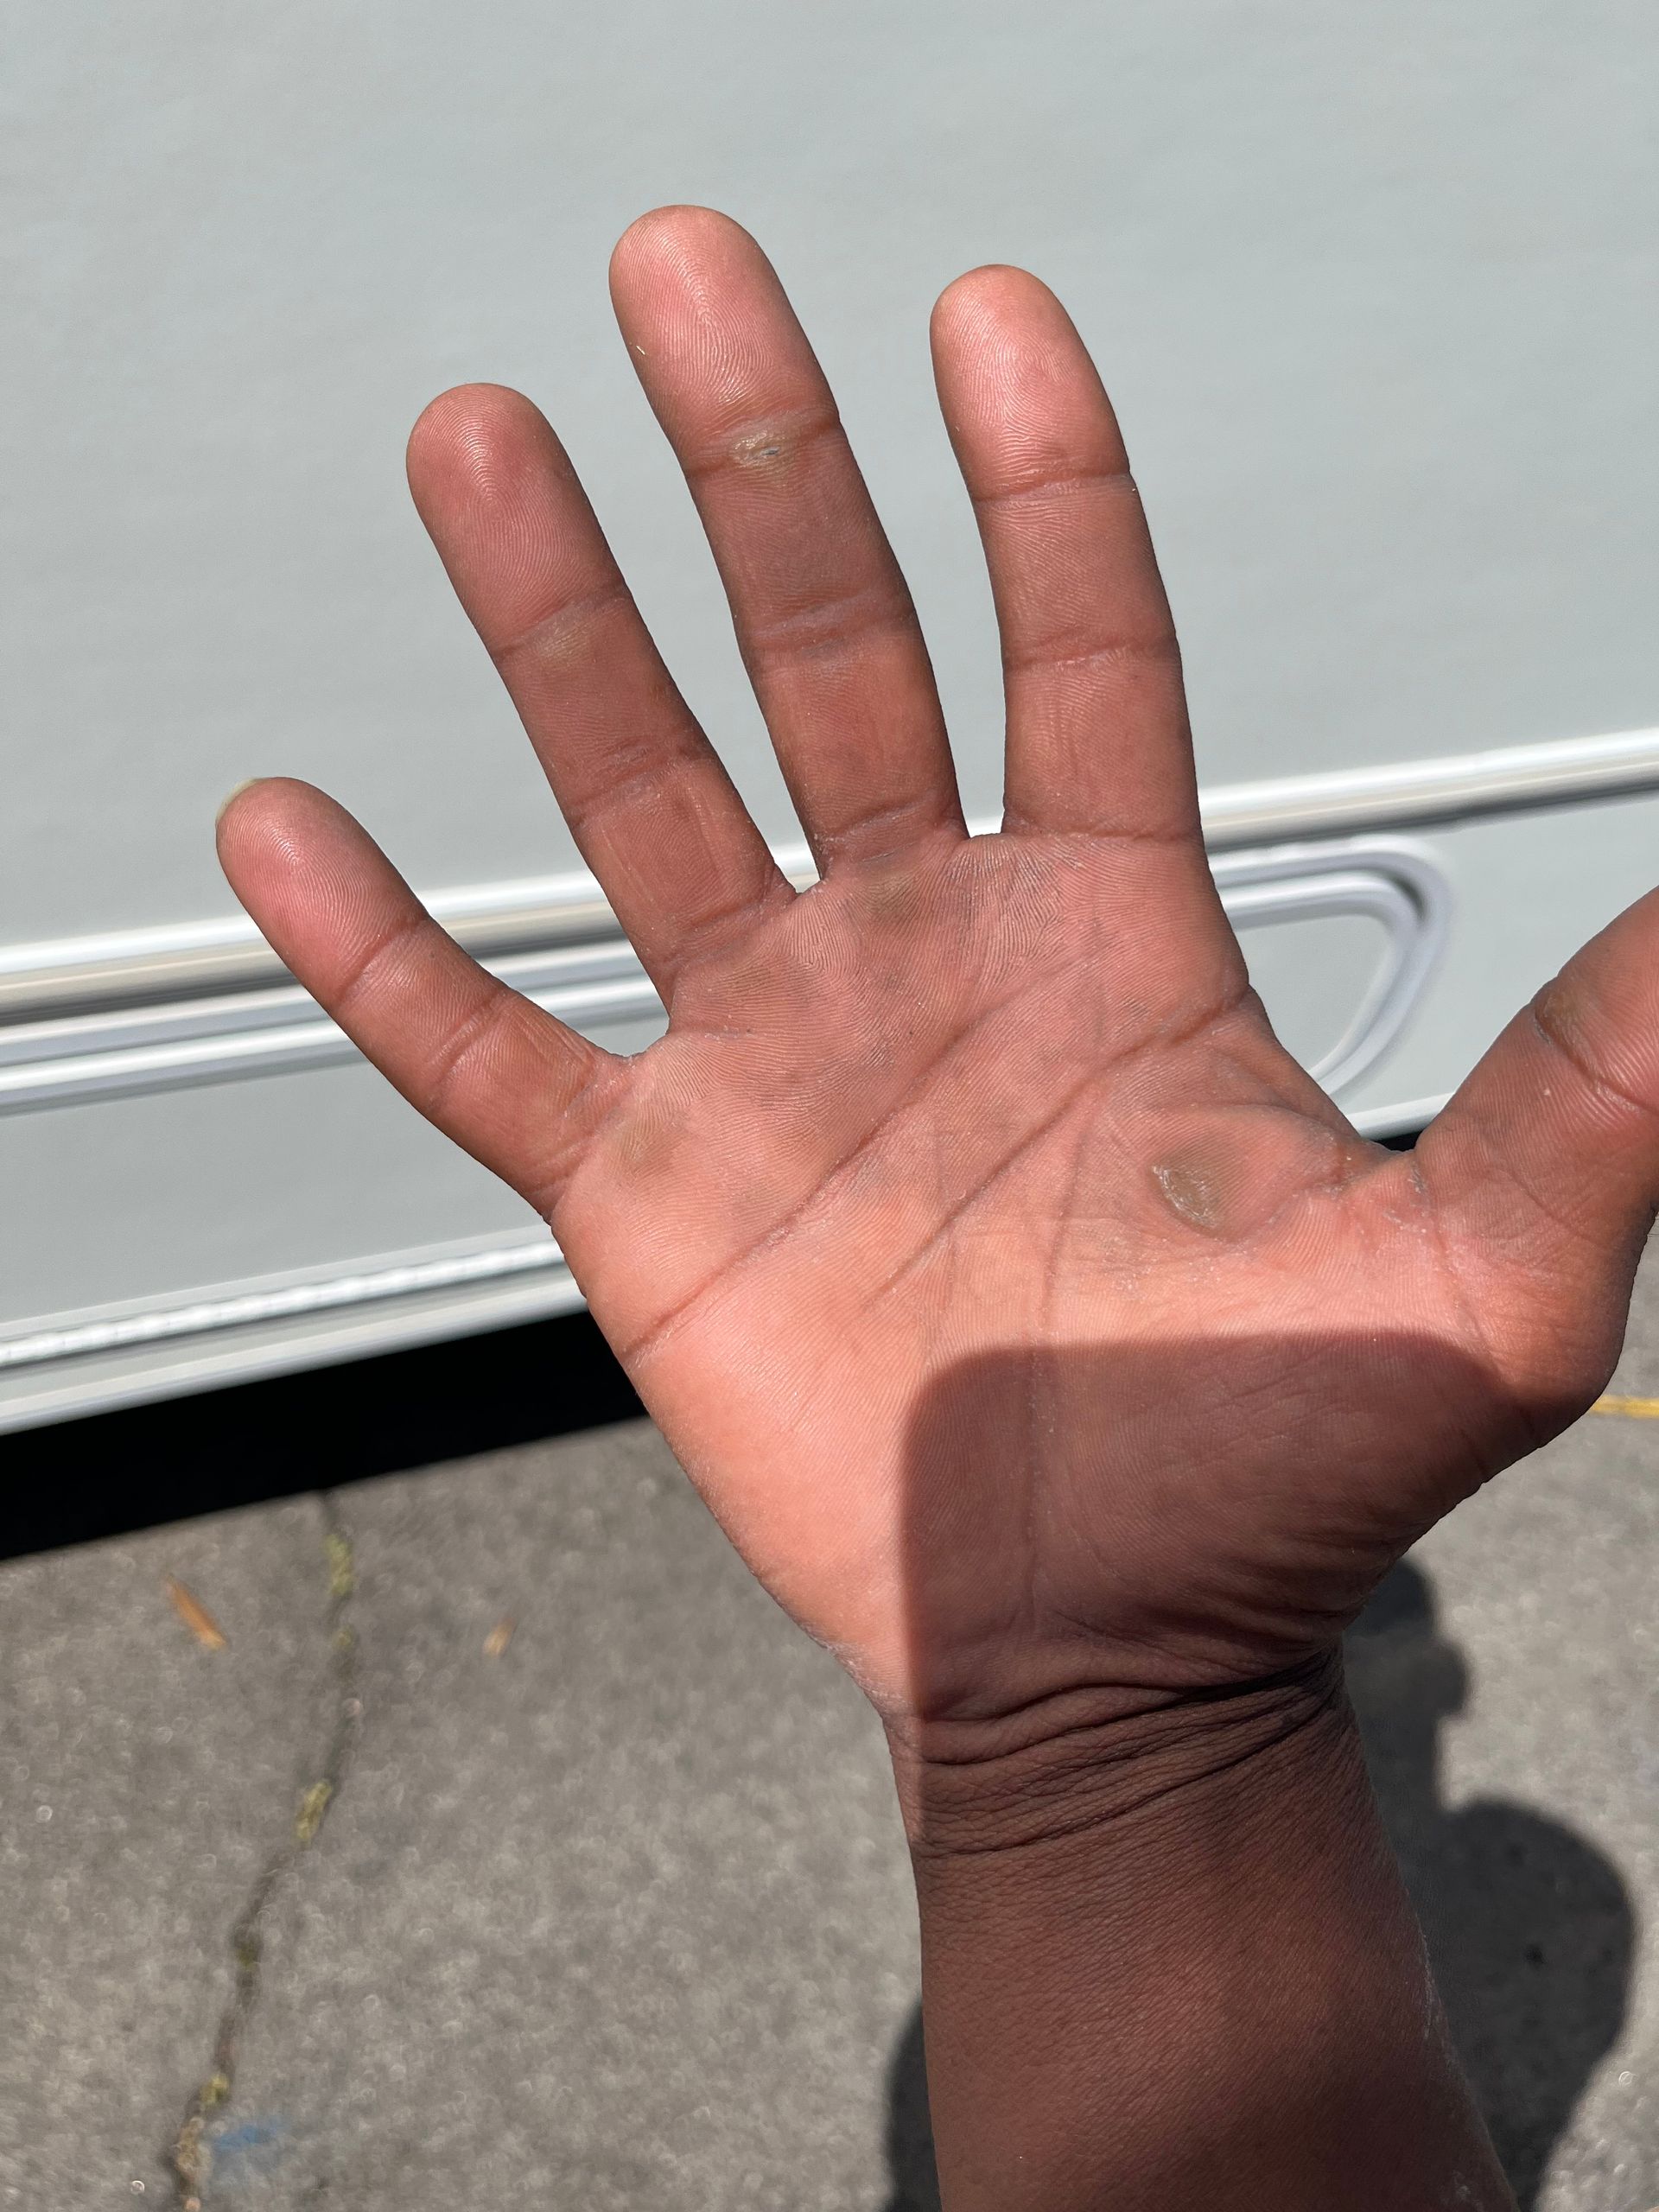 A close up of a person 's hand with a car in the background